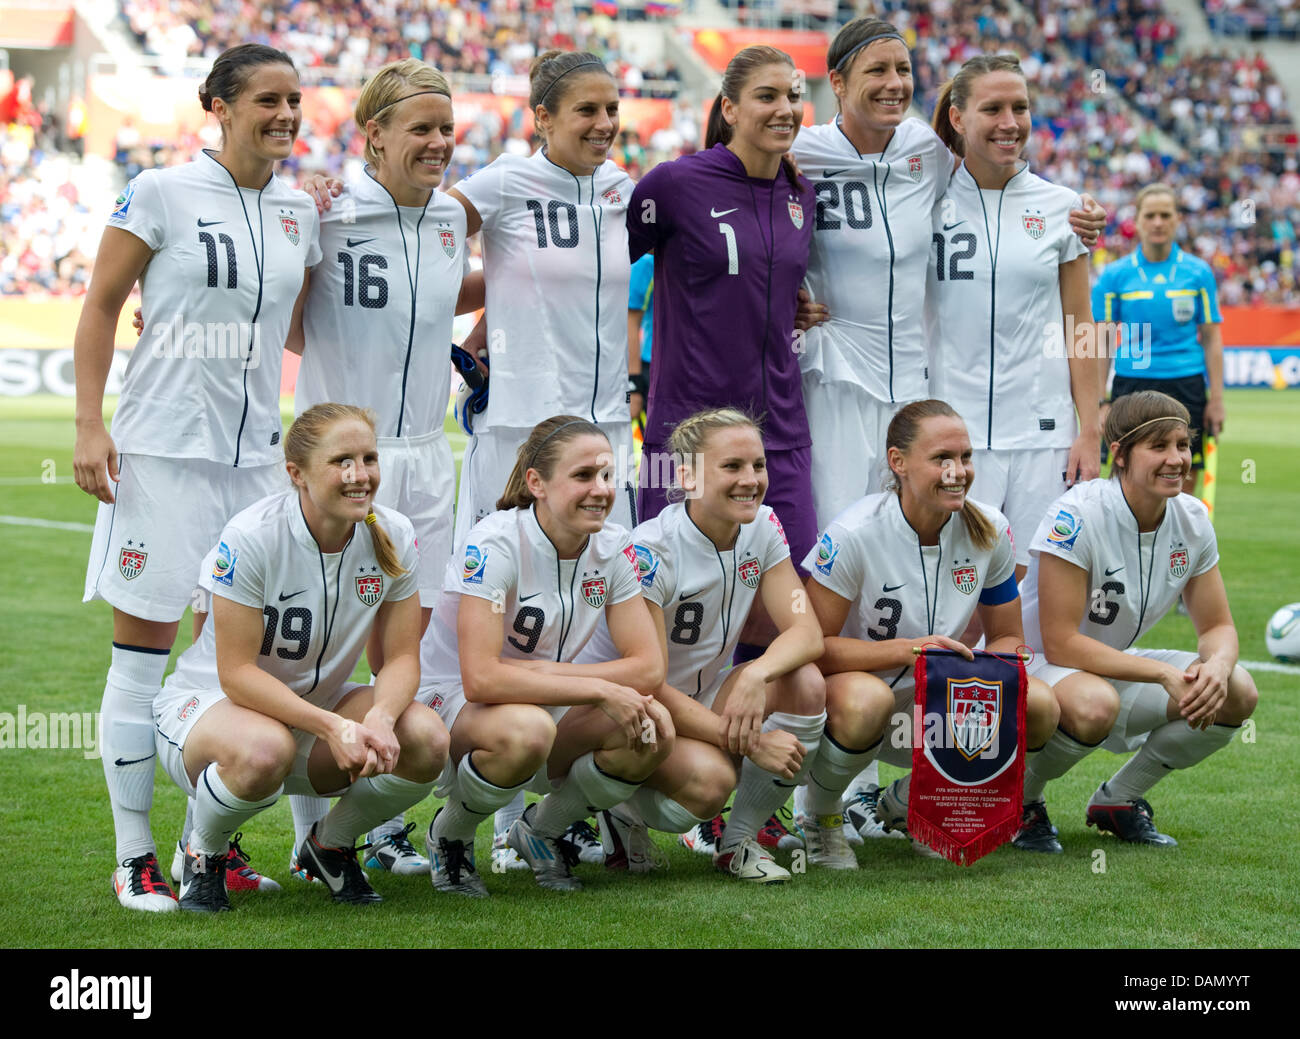 The US-Team - (l-r) Alex Krieger, Rachel Buehler, Lori Lindsey, Heather O'Reilly, Carli Lloyd, Amy Rodriguez, goalkeeper Hope Solo, Christie Rampone, Abby Wambach, Lauren Cheney and Amy le Peilbet - during the Group C match USA against Colombia of FIFA Women's World Cup soccer tournament at the Rhein Neckar Arena in Sinsheim, Germany, 02 July 2011. Foto: Uwe Anspach dpa/lsw Stock Photo